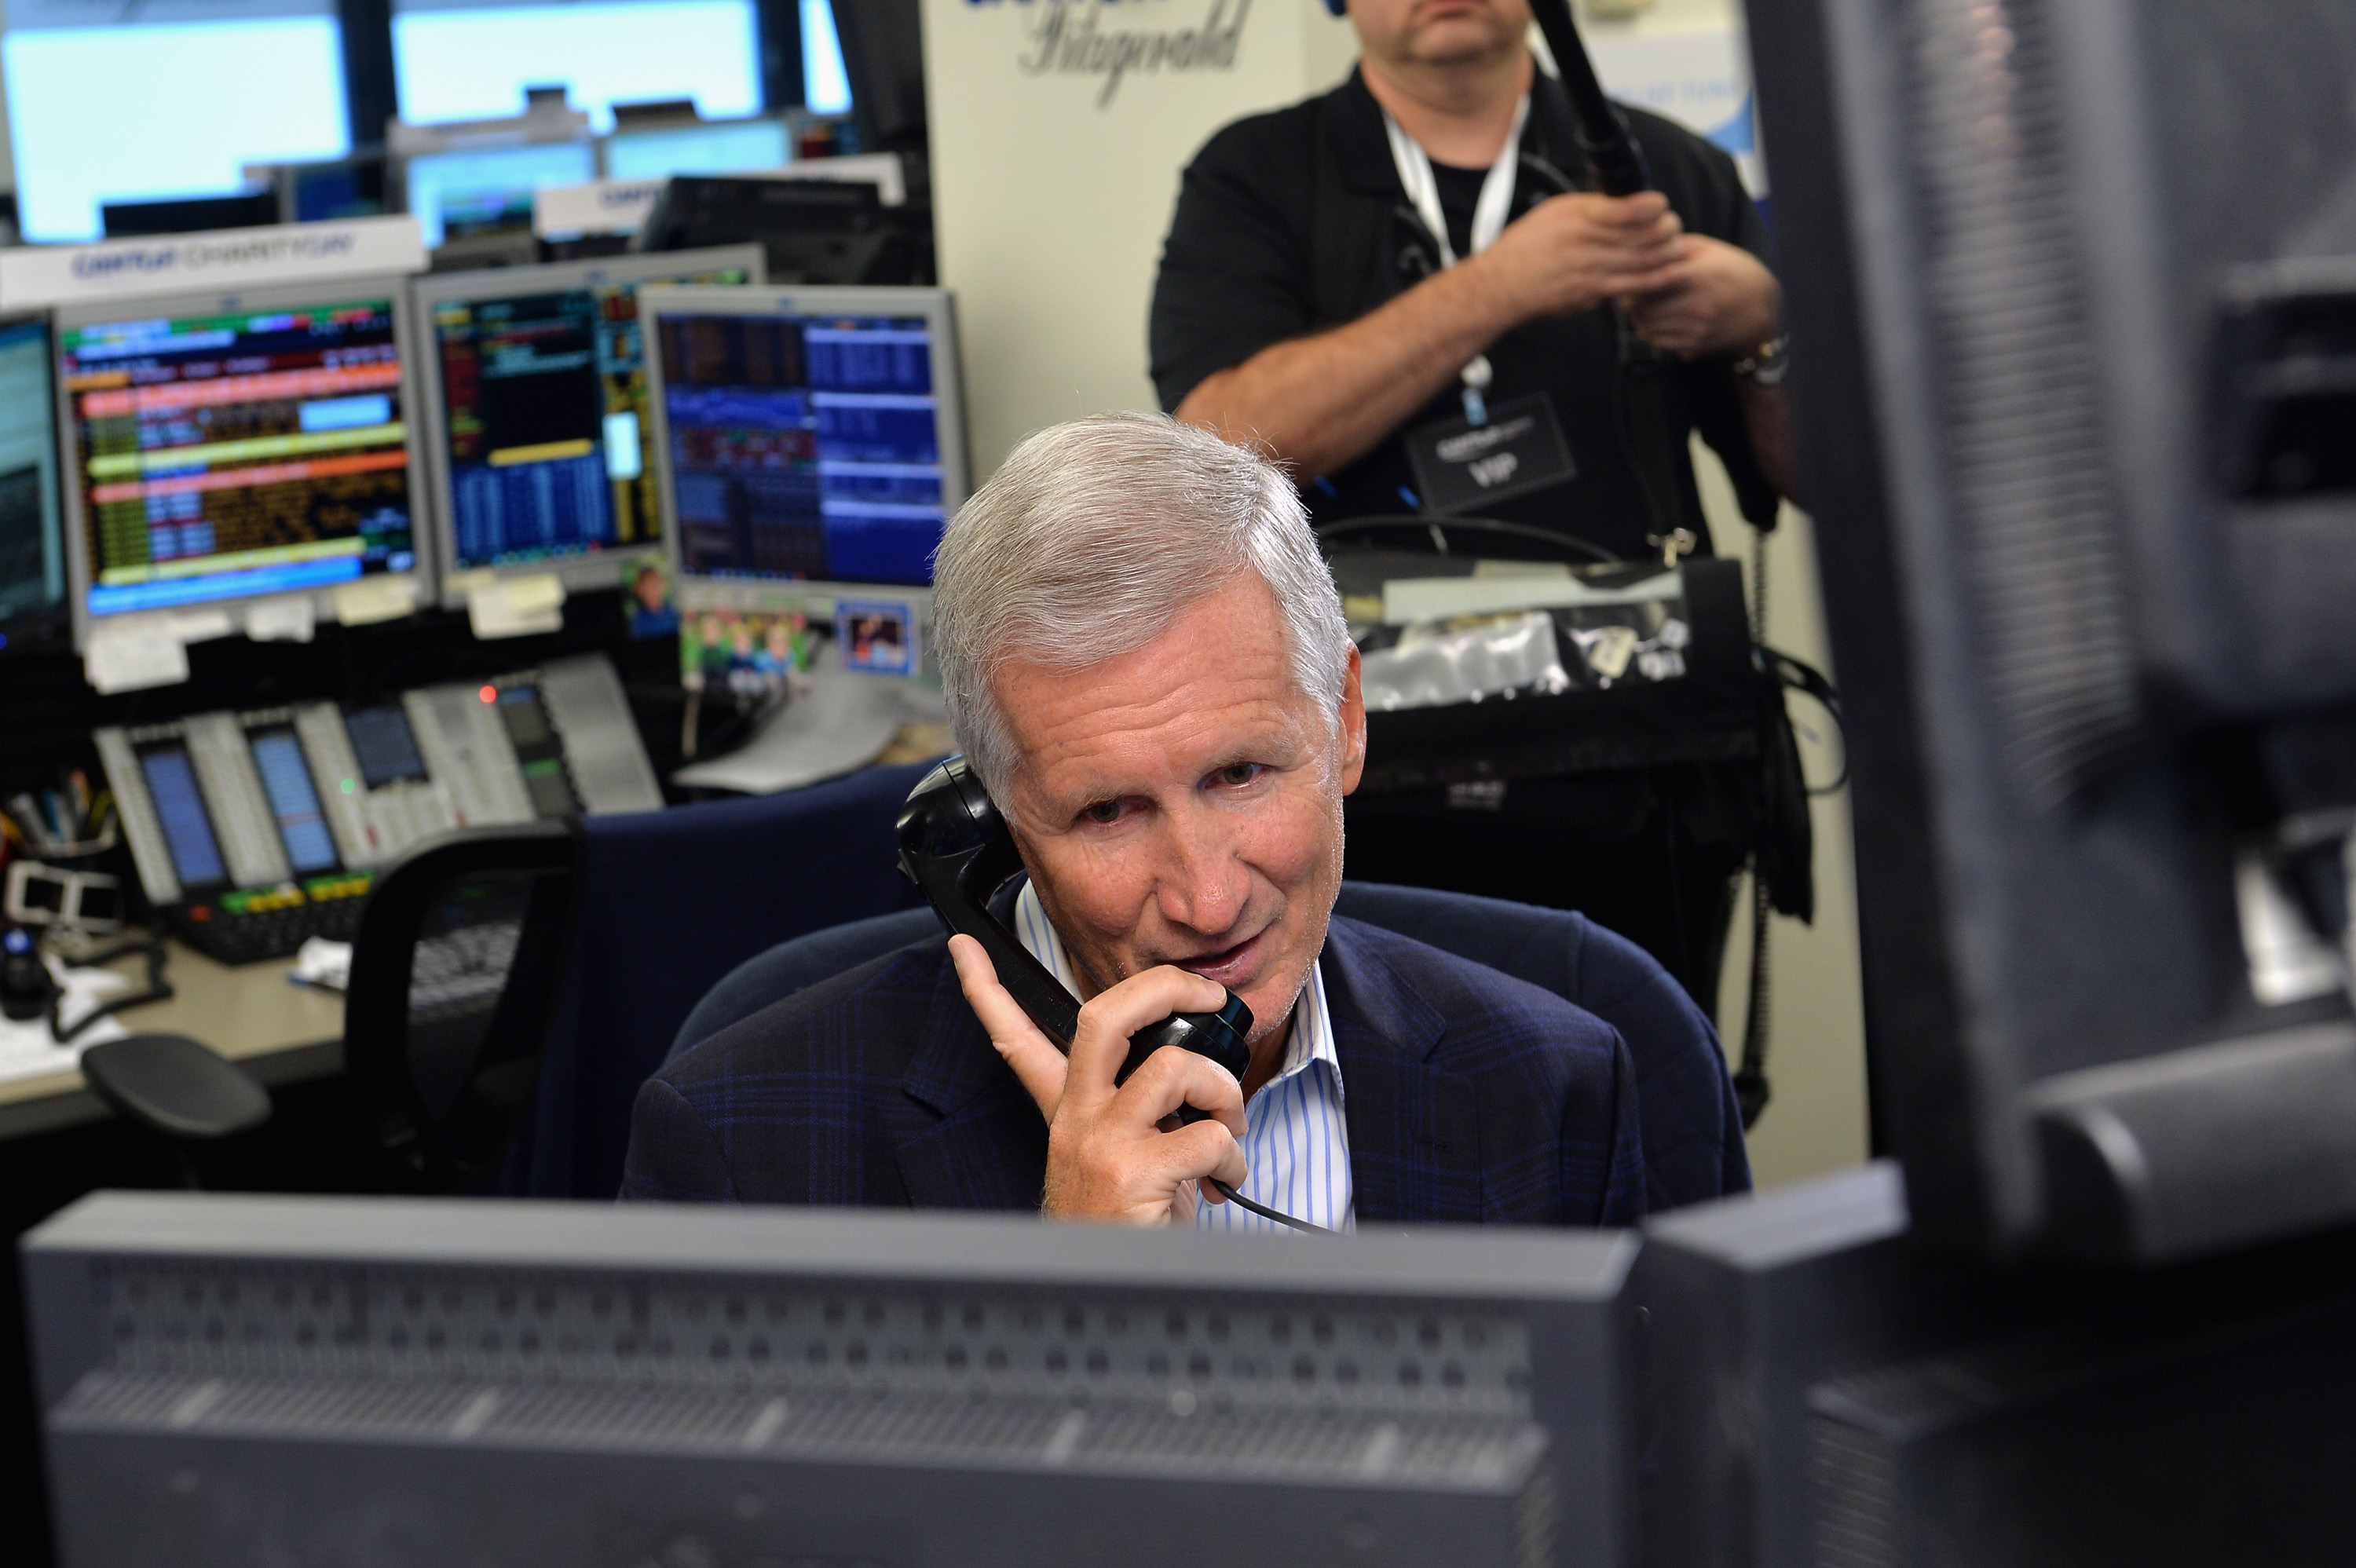 Sports commentator Mike Breen speaks on the phone